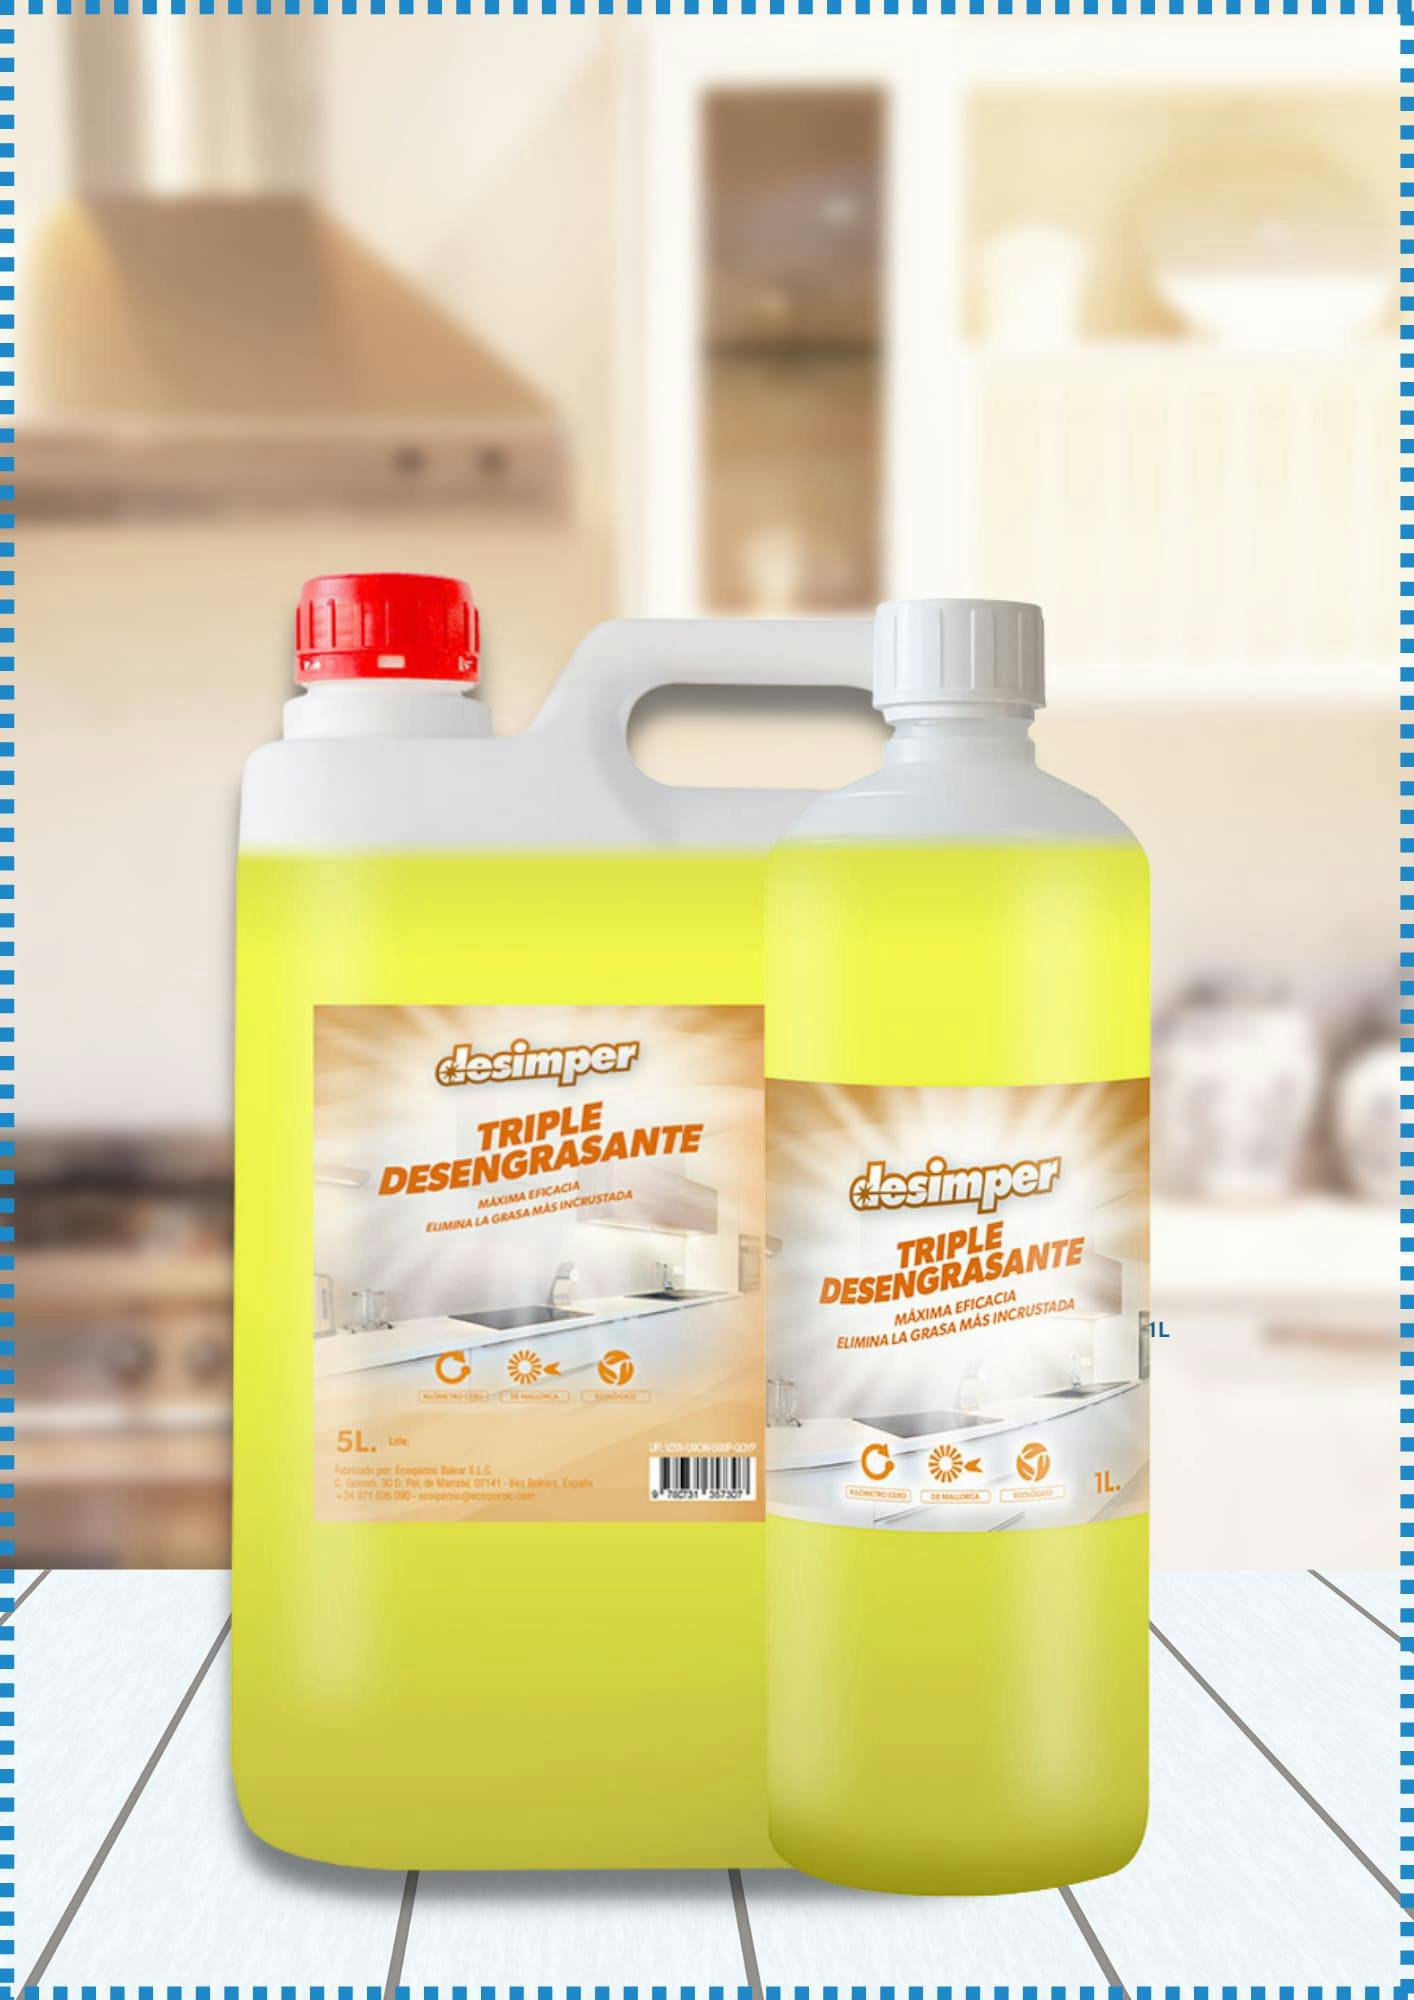 Ideal product for cleaning fats, burnt oils and persistent dirt.